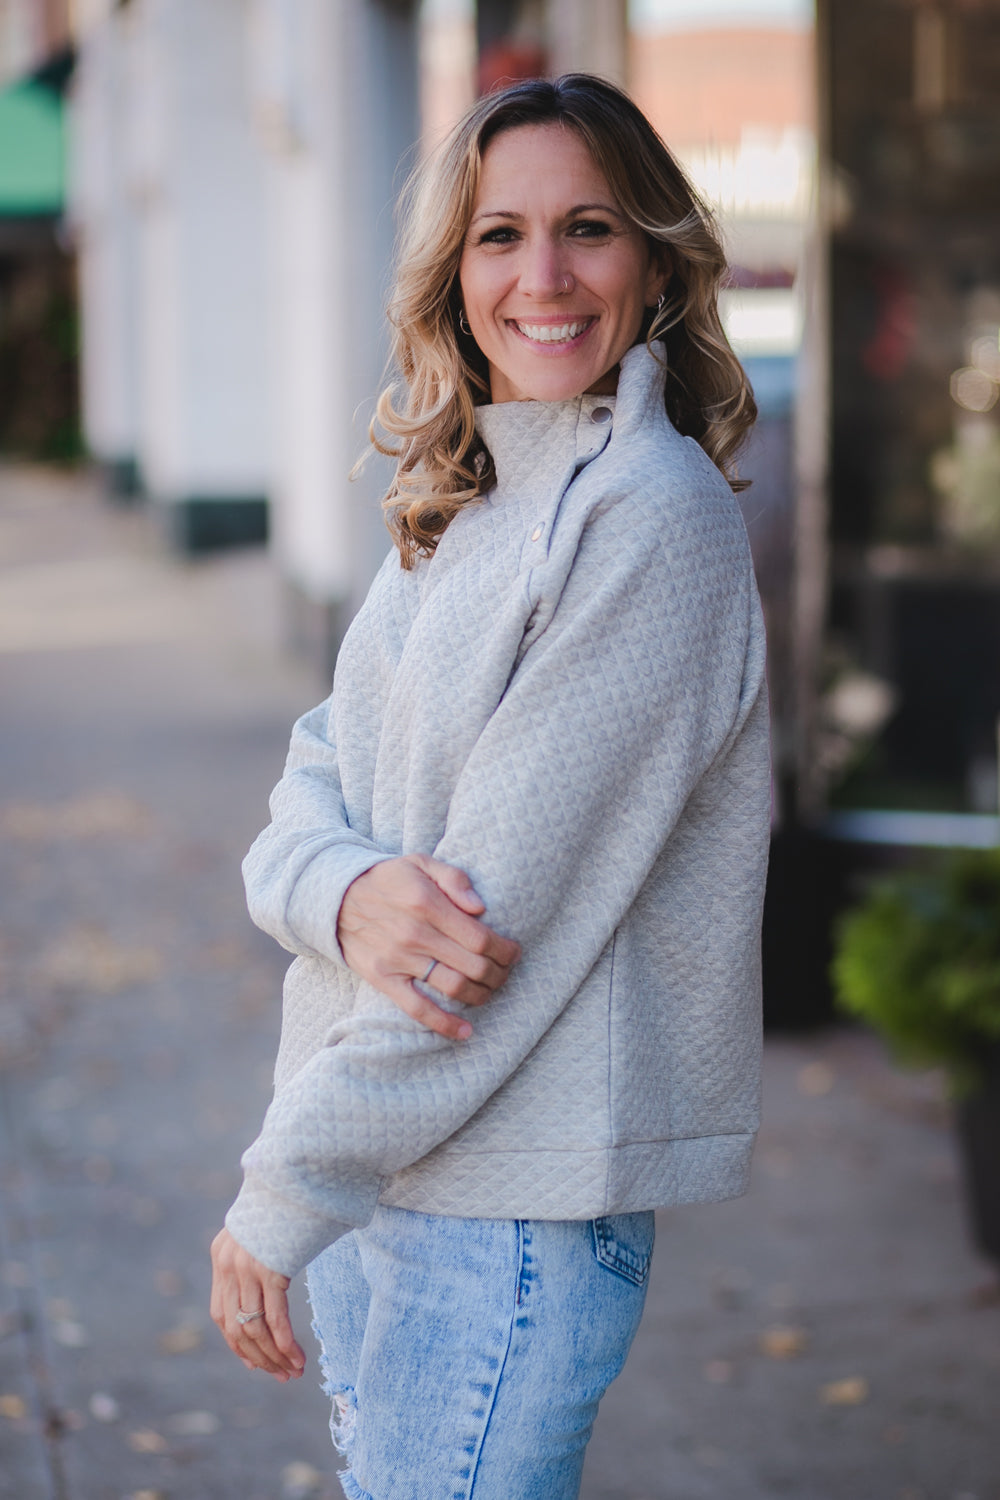 Sleigh Ride Quilted Sweatshirt - Oatmeal